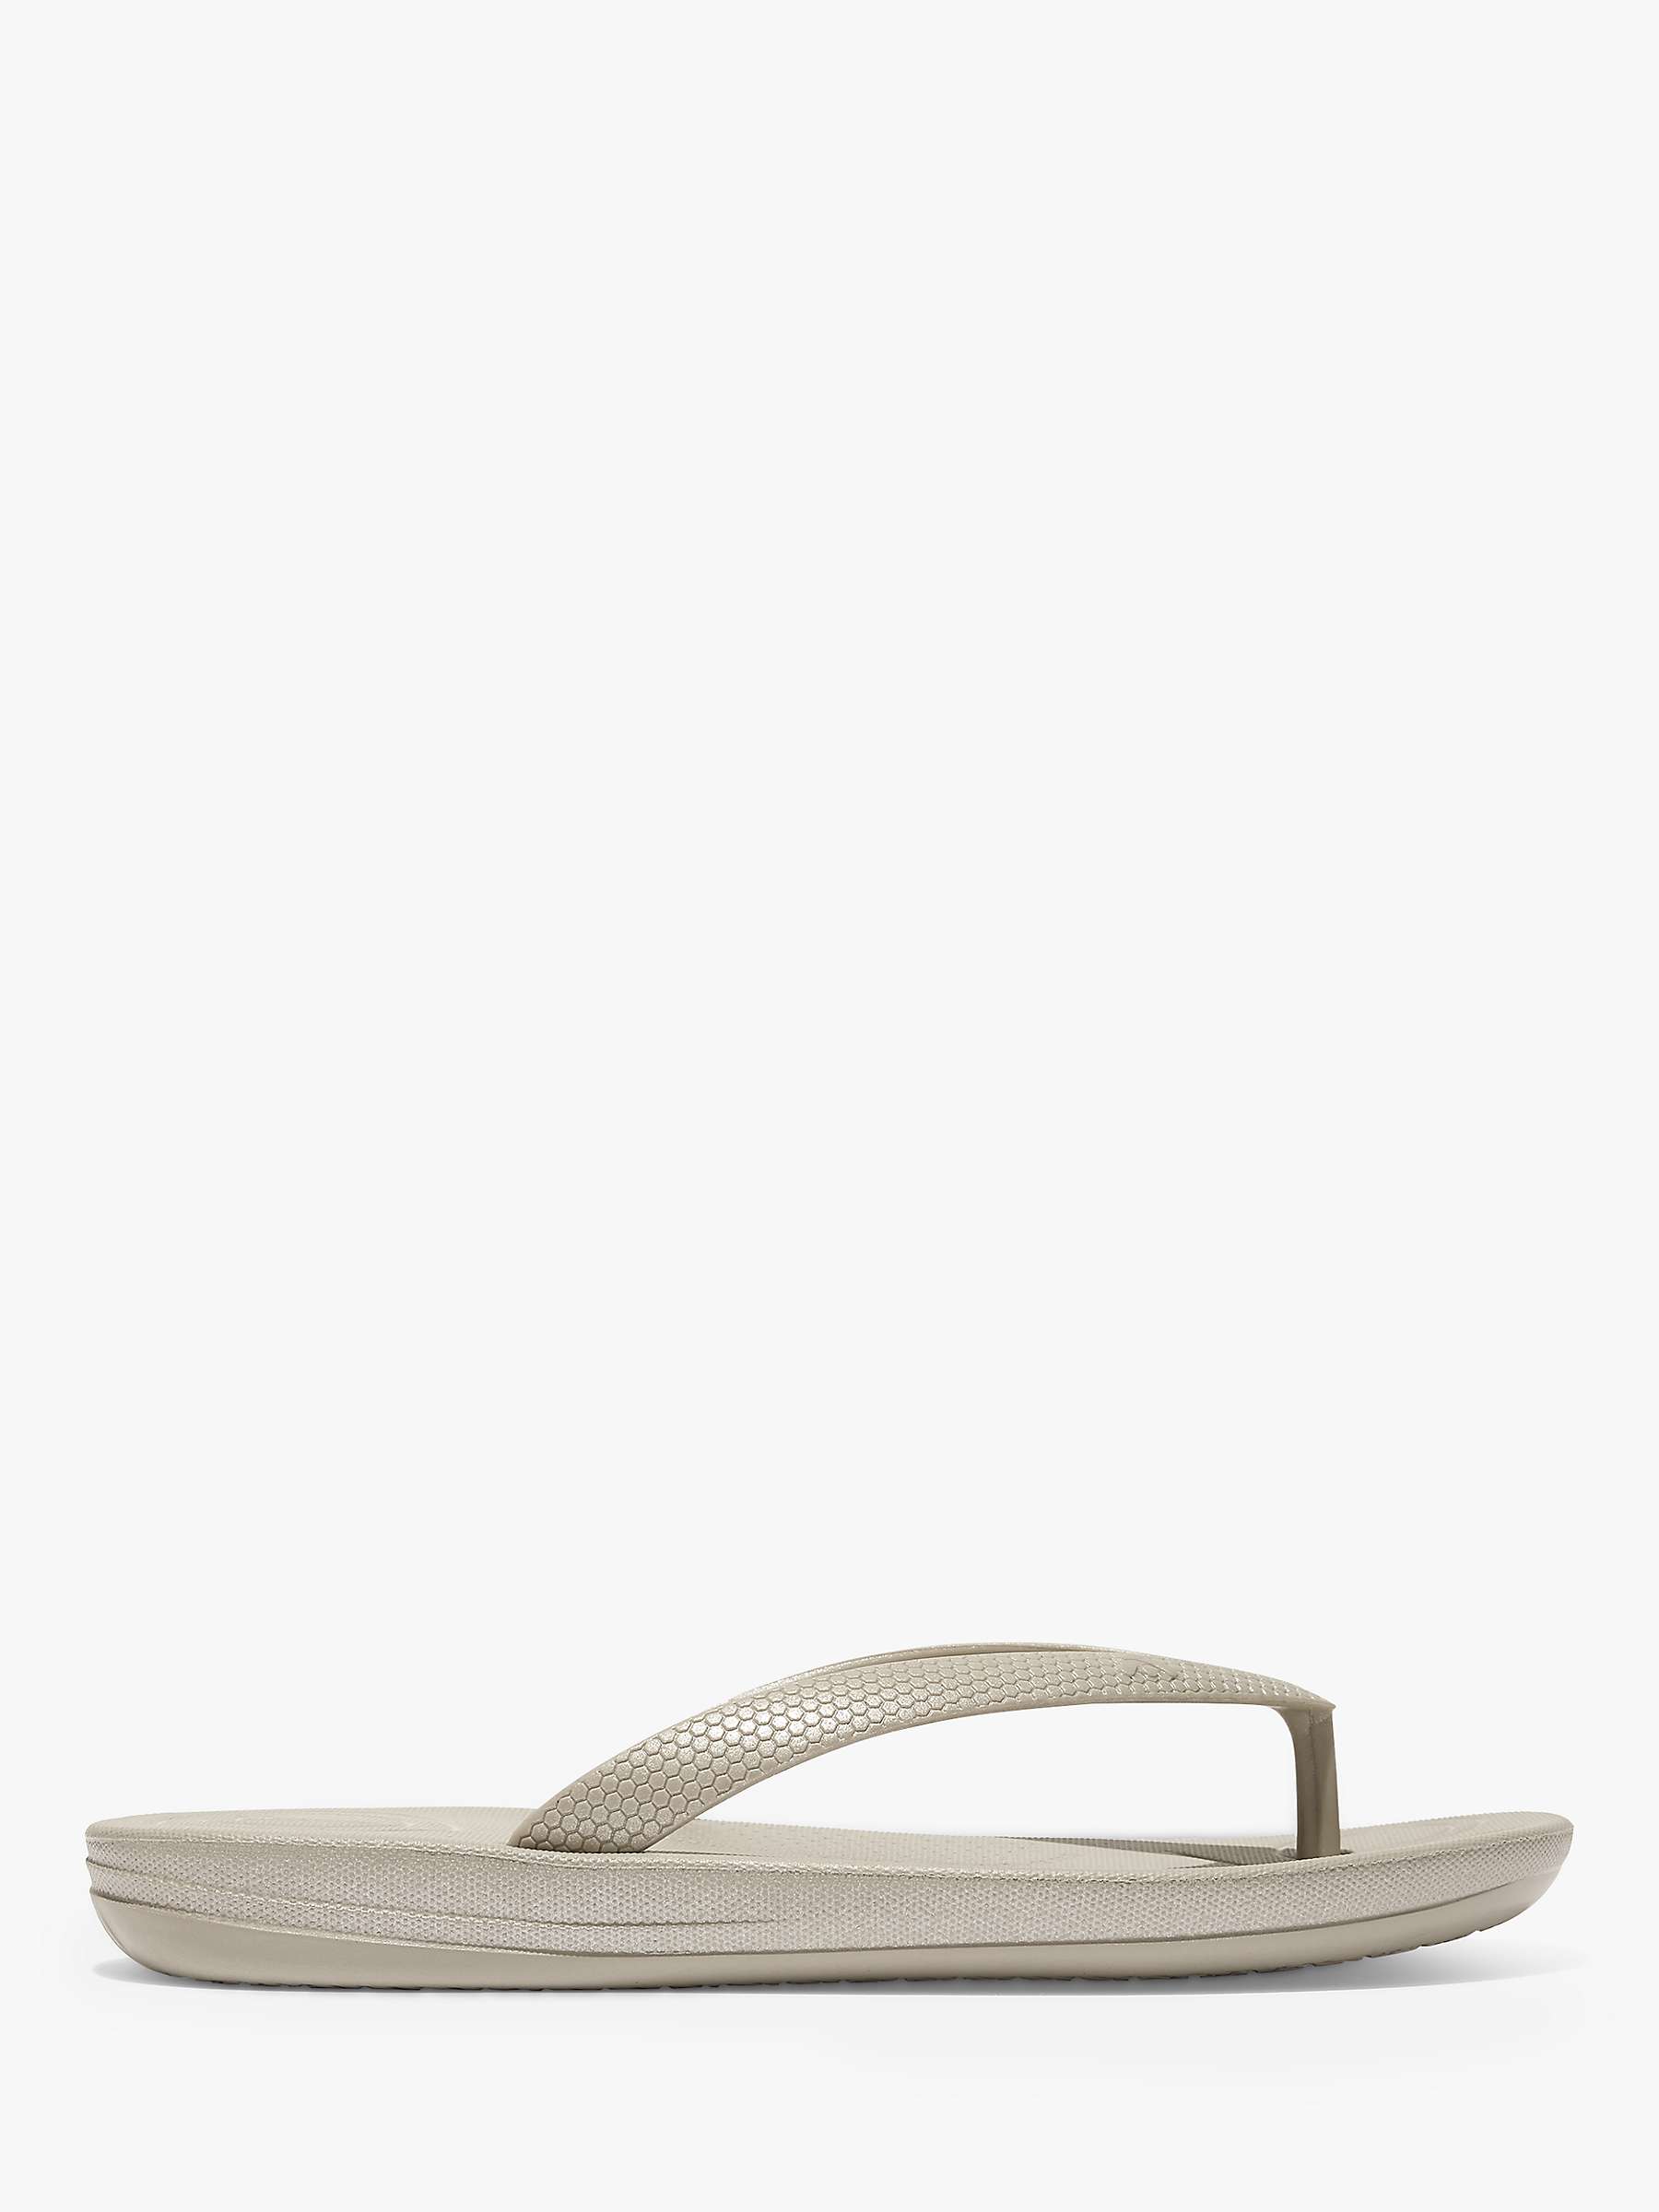 Buy FitFlop Kids' Iqushion Pearlised Flip Flops, Silver Online at johnlewis.com